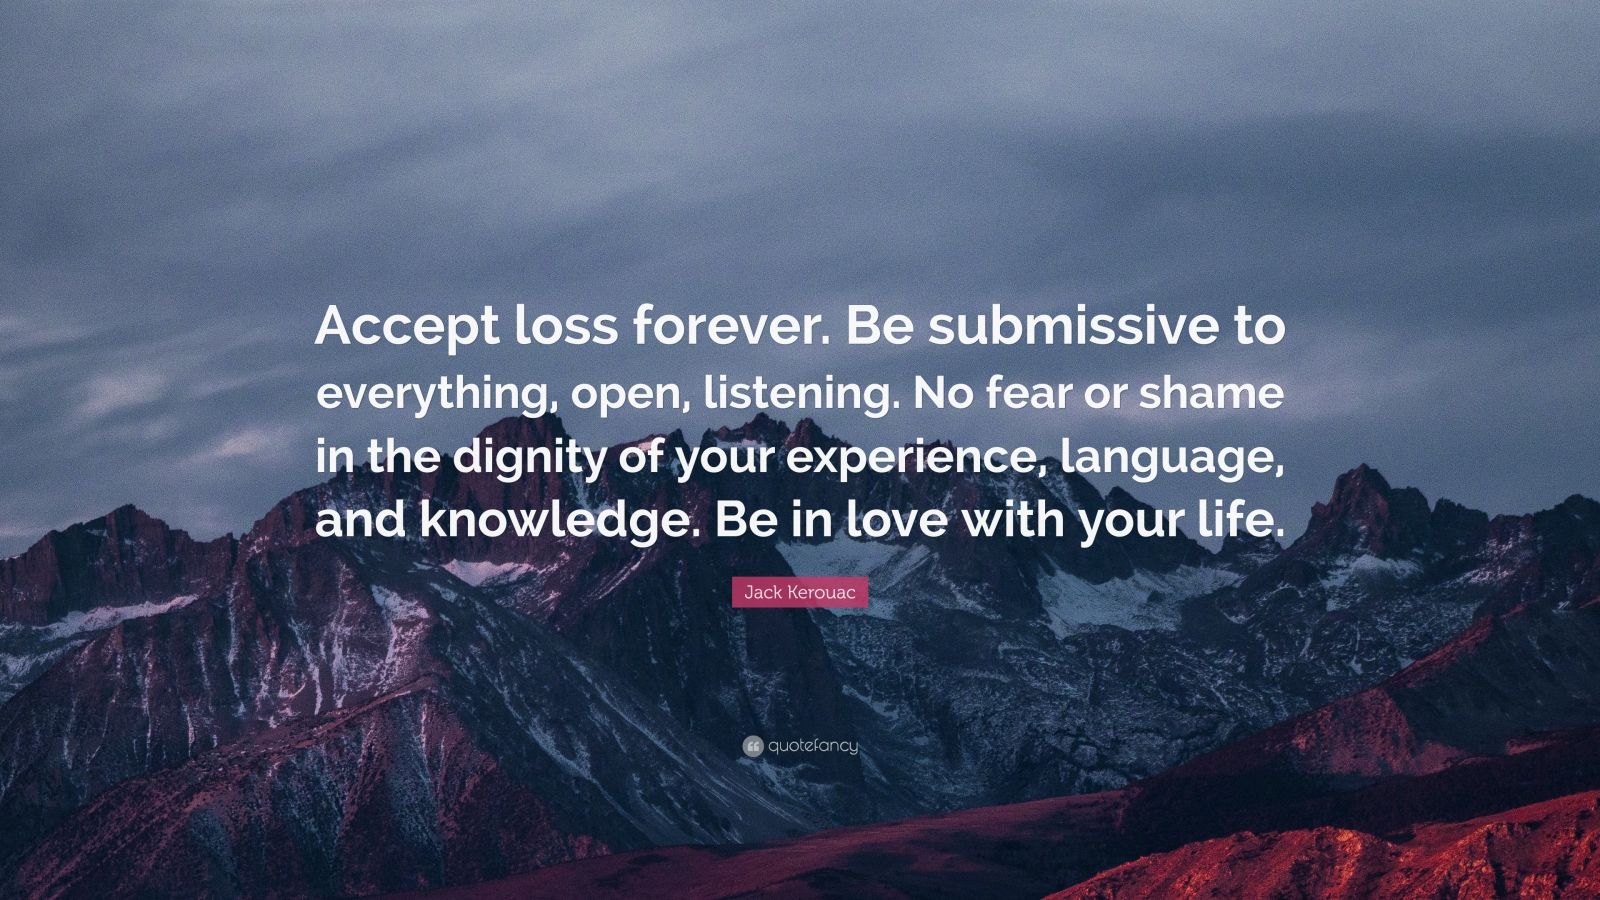 Jack Kerouac Quote “Accept loss forever Be submissive to everything open